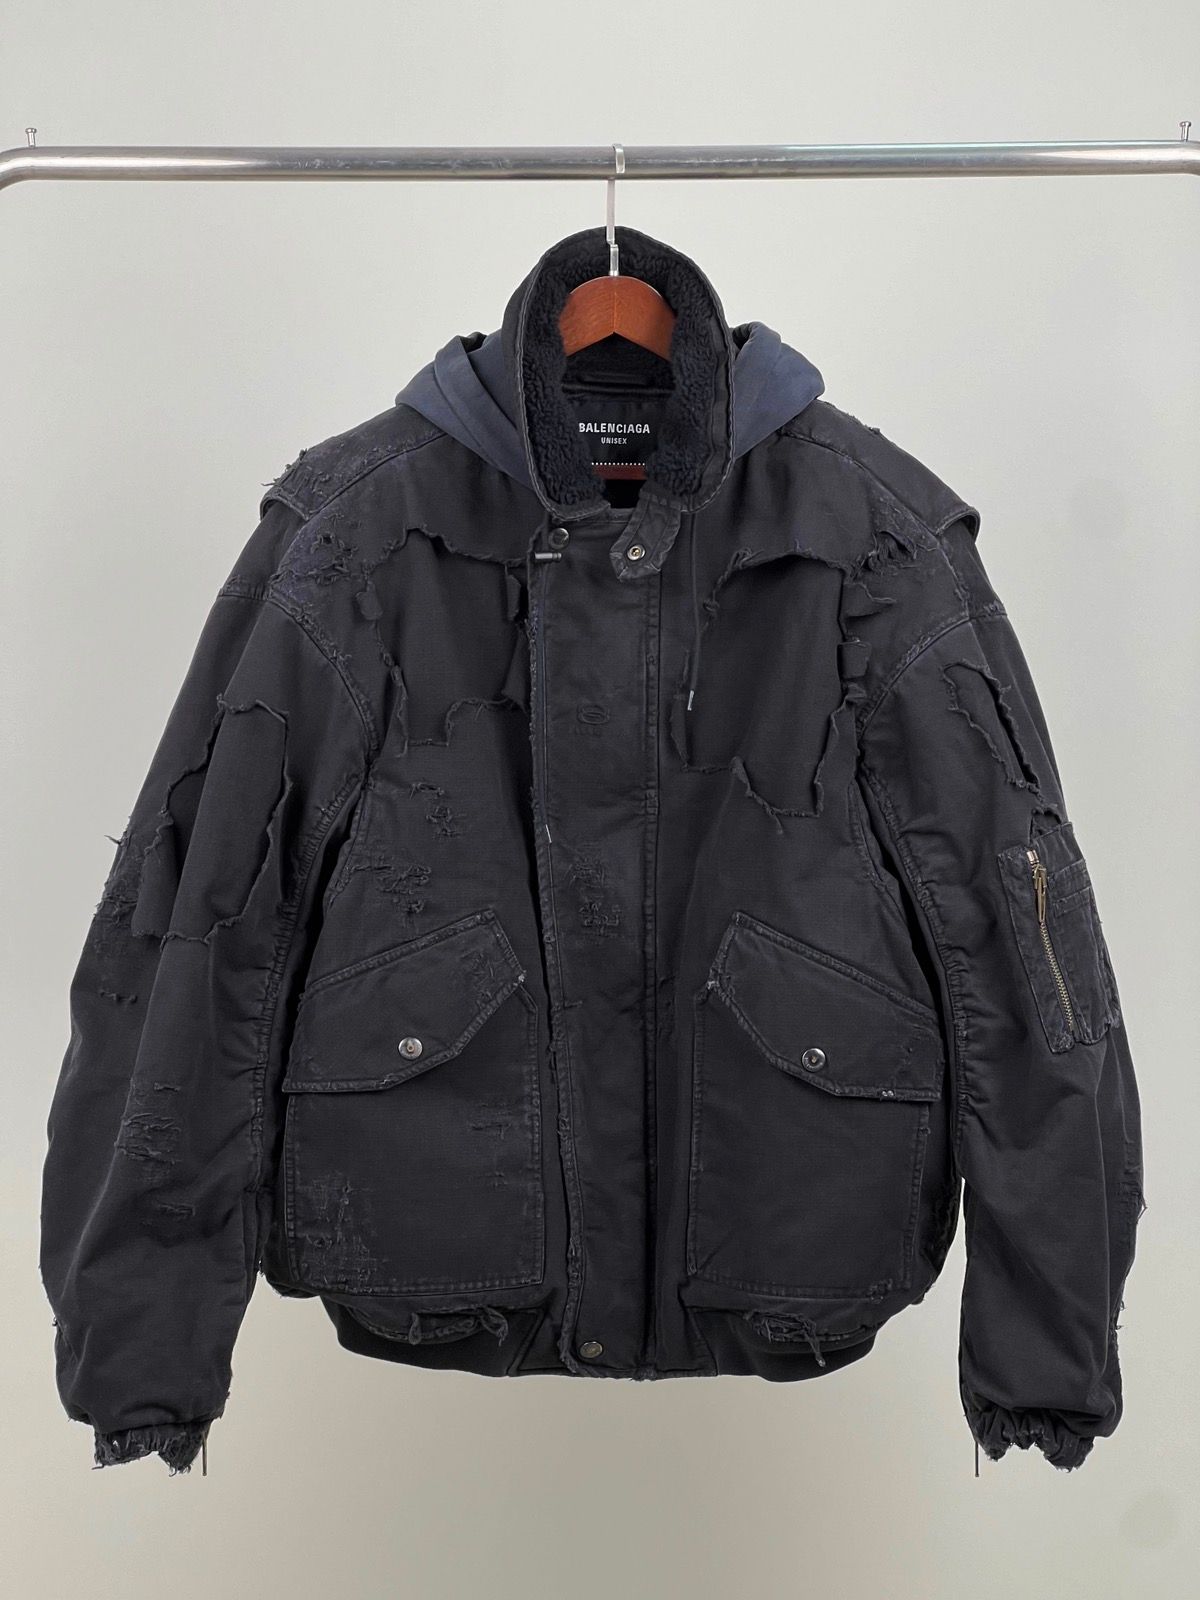 Pre-owned Balenciaga Destroyed Bomber Jacket Size 2 In Black